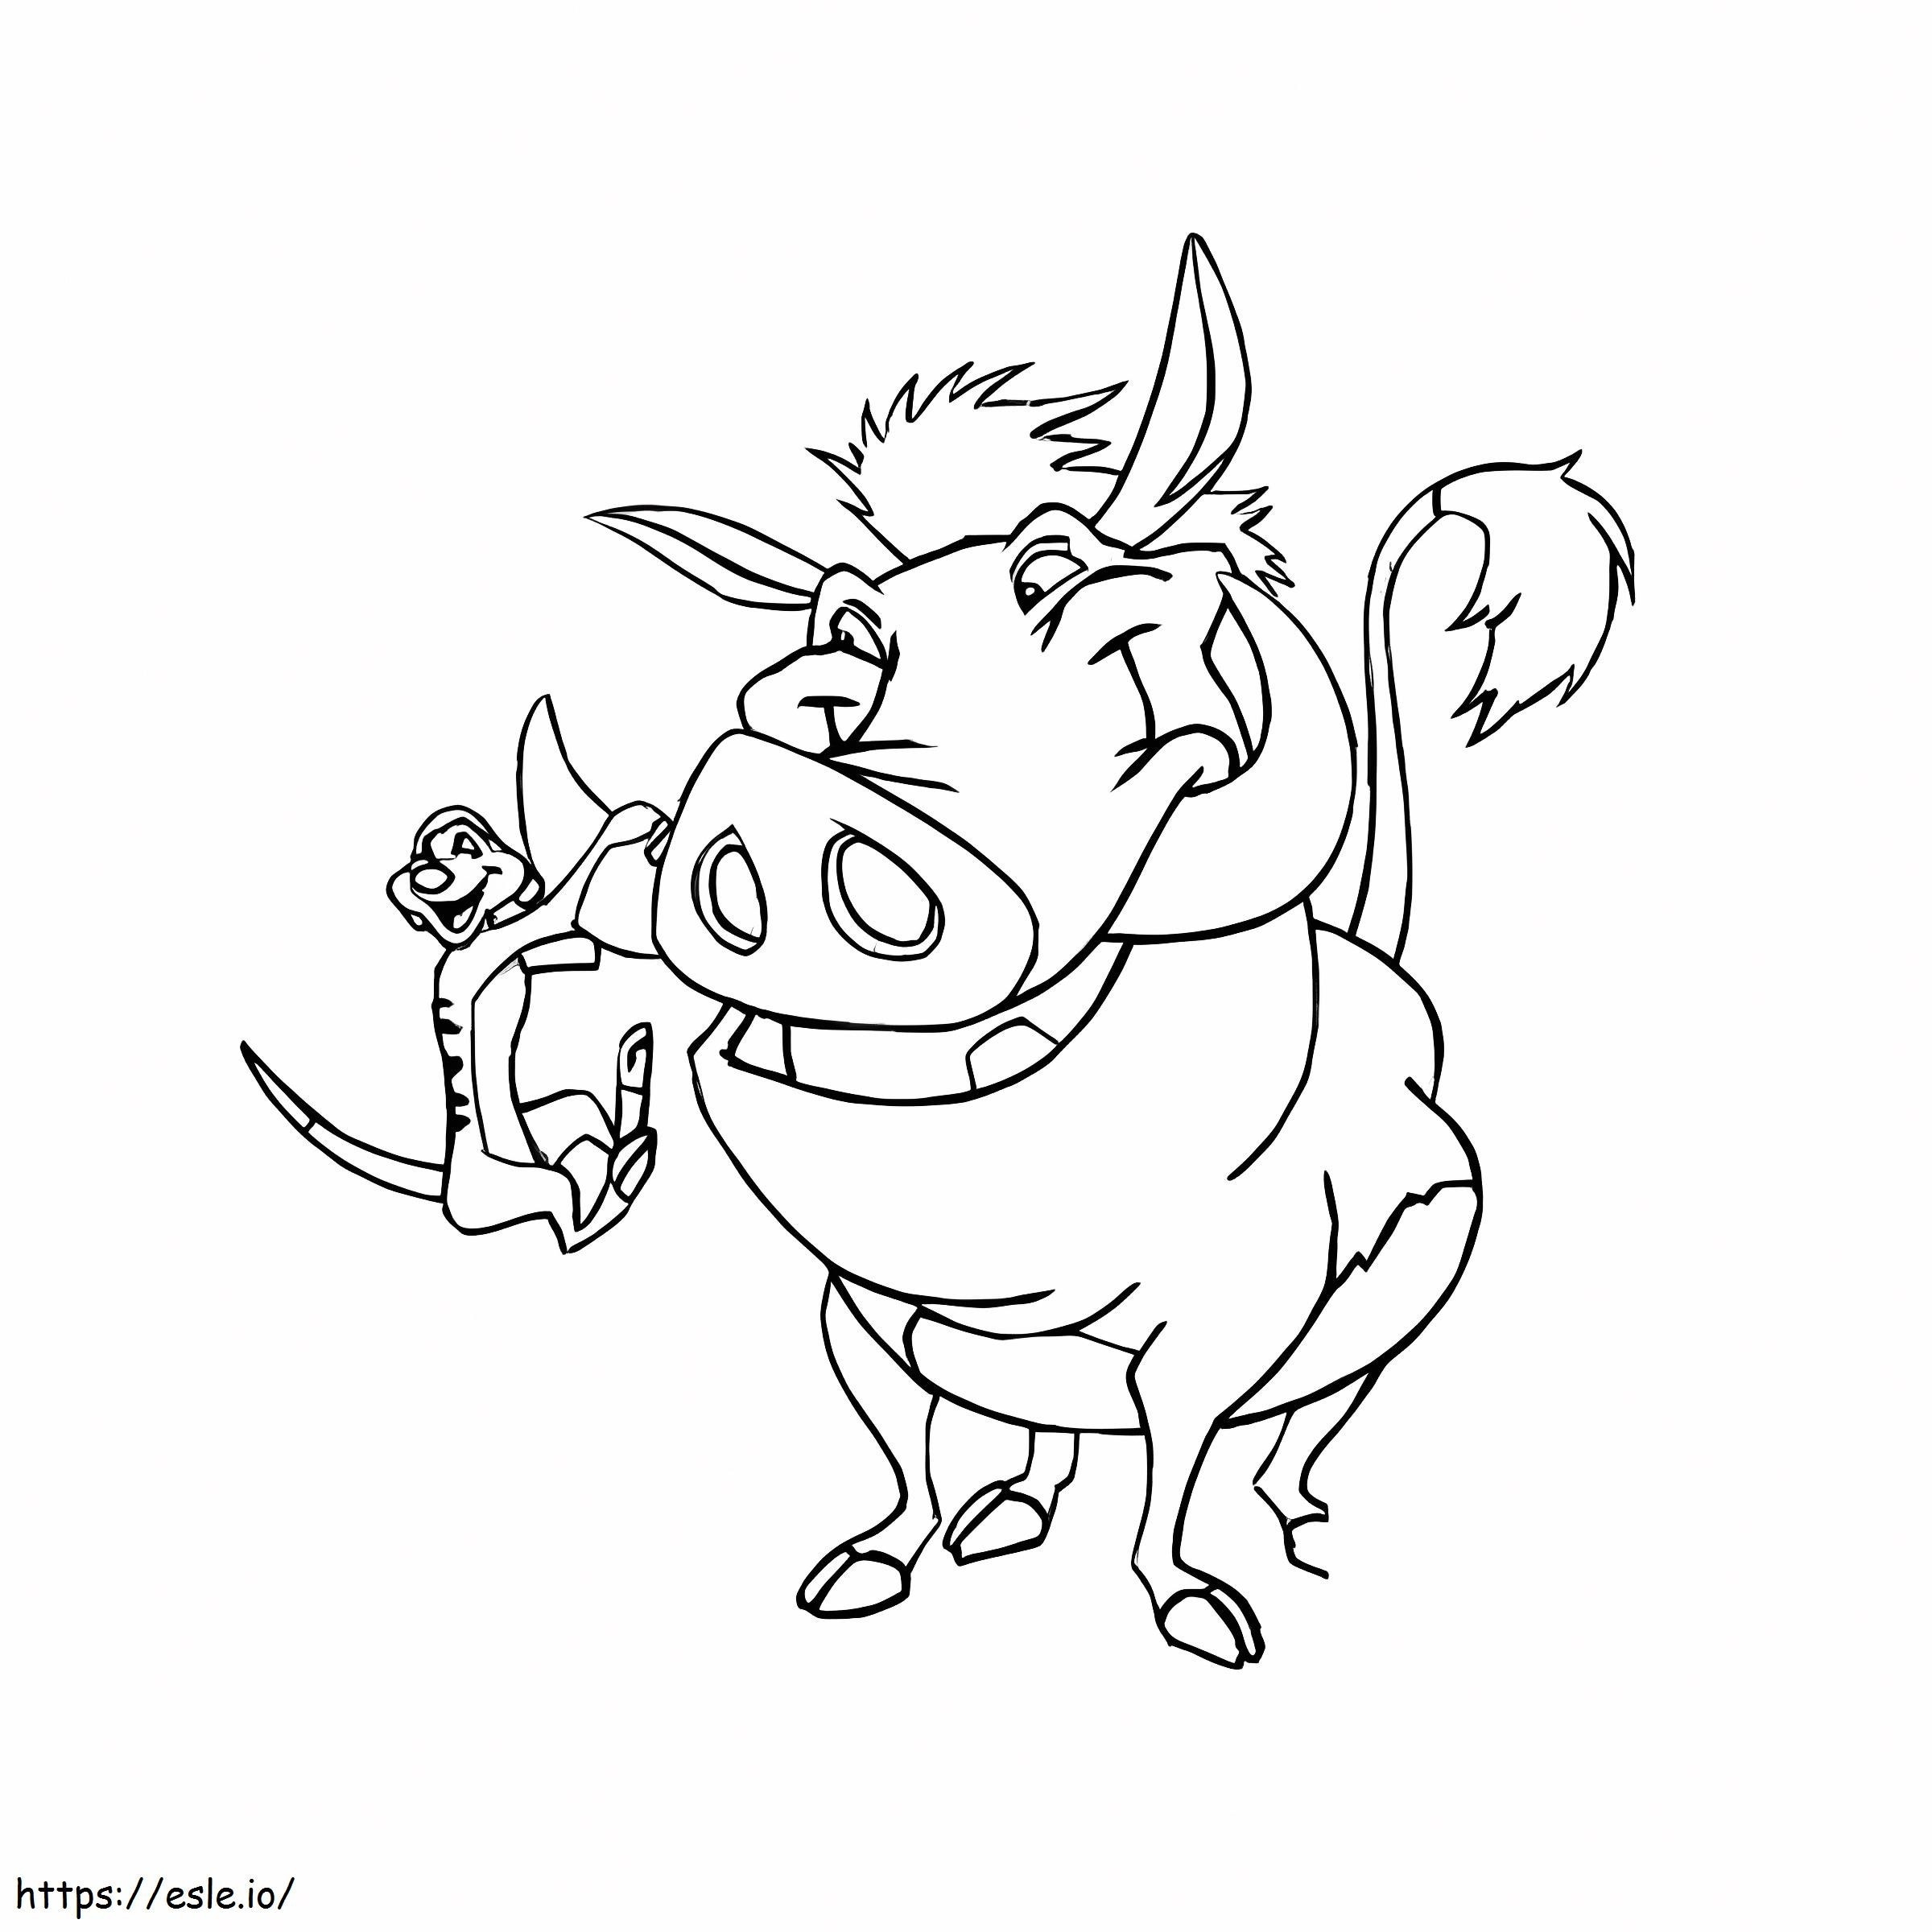 Disney Timon And Pumbaa coloring page